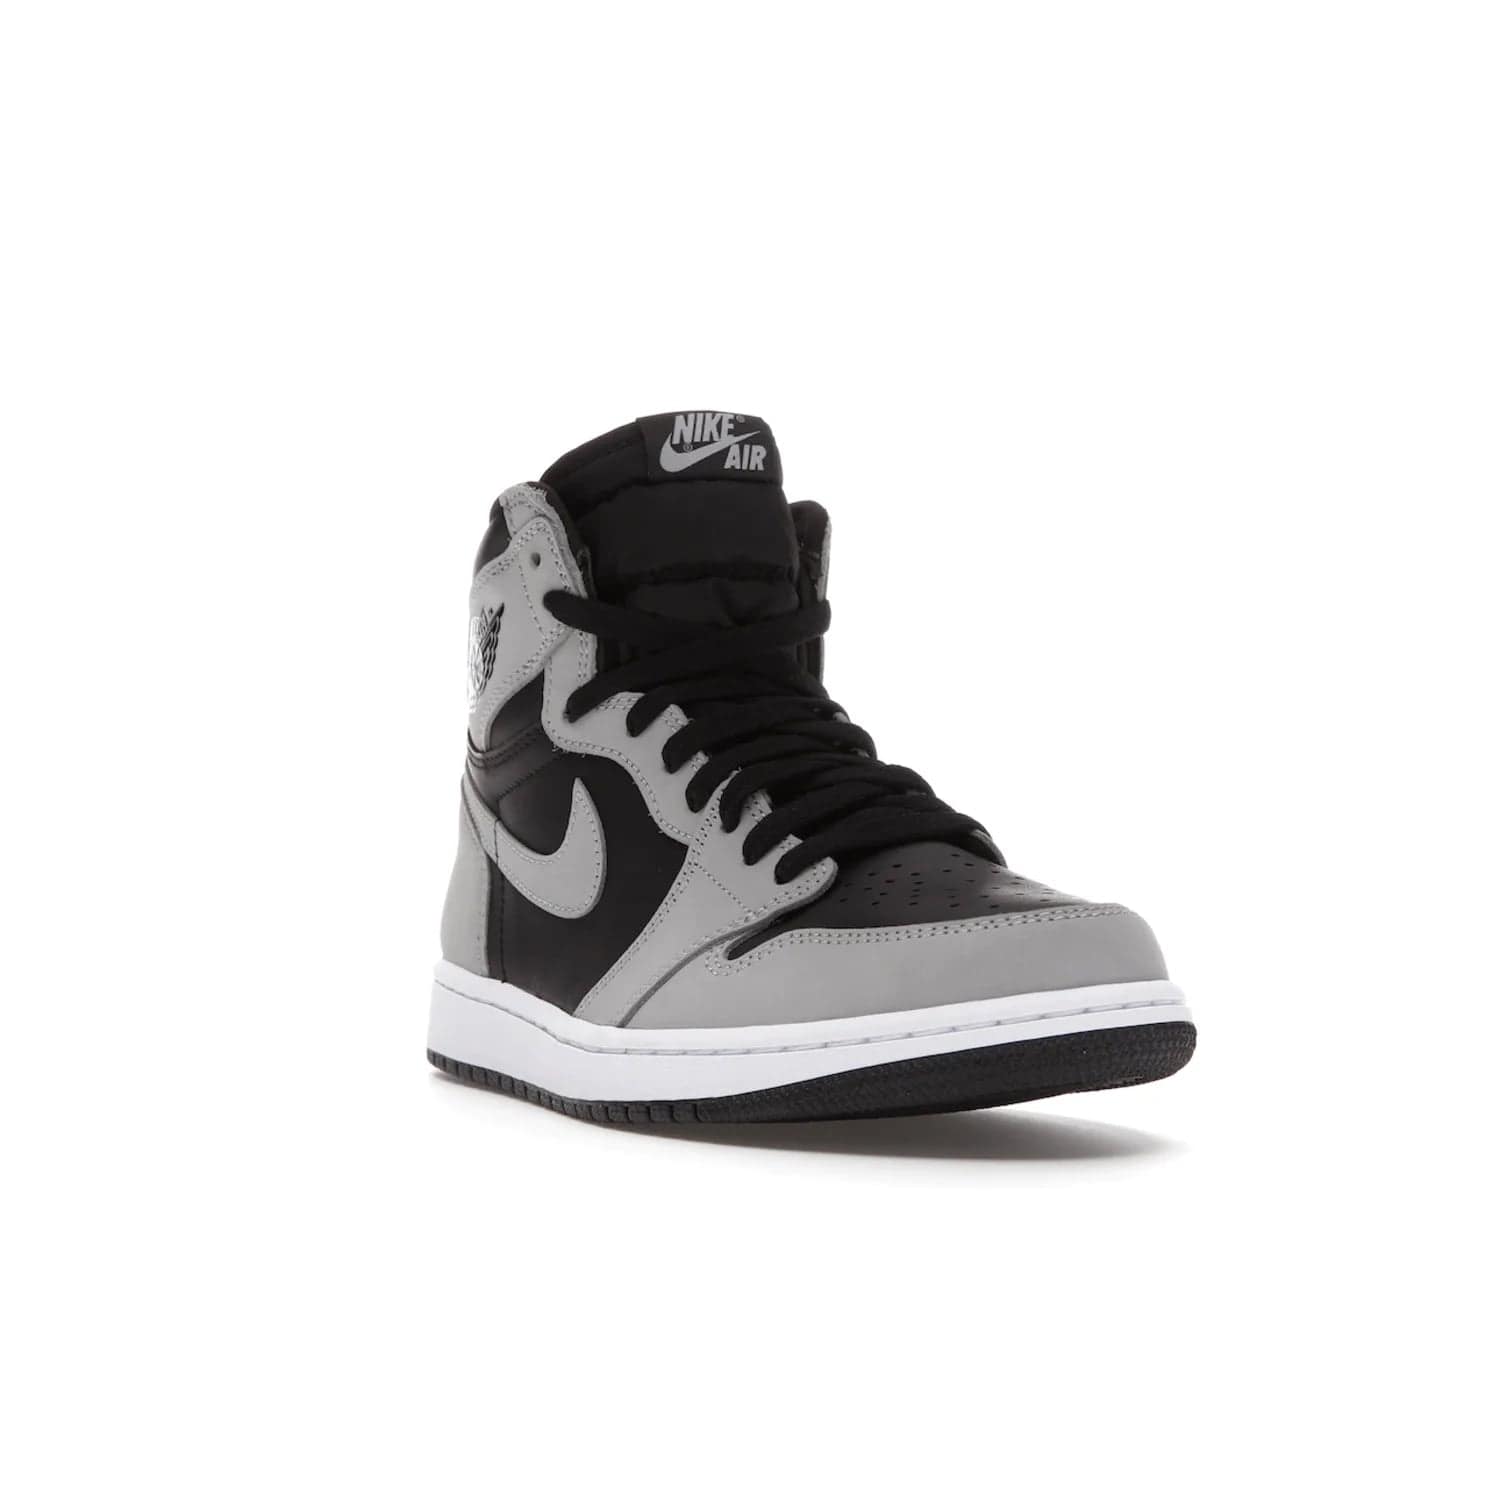 Jordan 1 Retro High Shadow 2.0 - Image 7 - Only at www.BallersClubKickz.com - #
Classic Air Jordan 1 Retro High Shadow 2.0 with black leather base and Light Smoke Grey overlays. Released in May 2021.